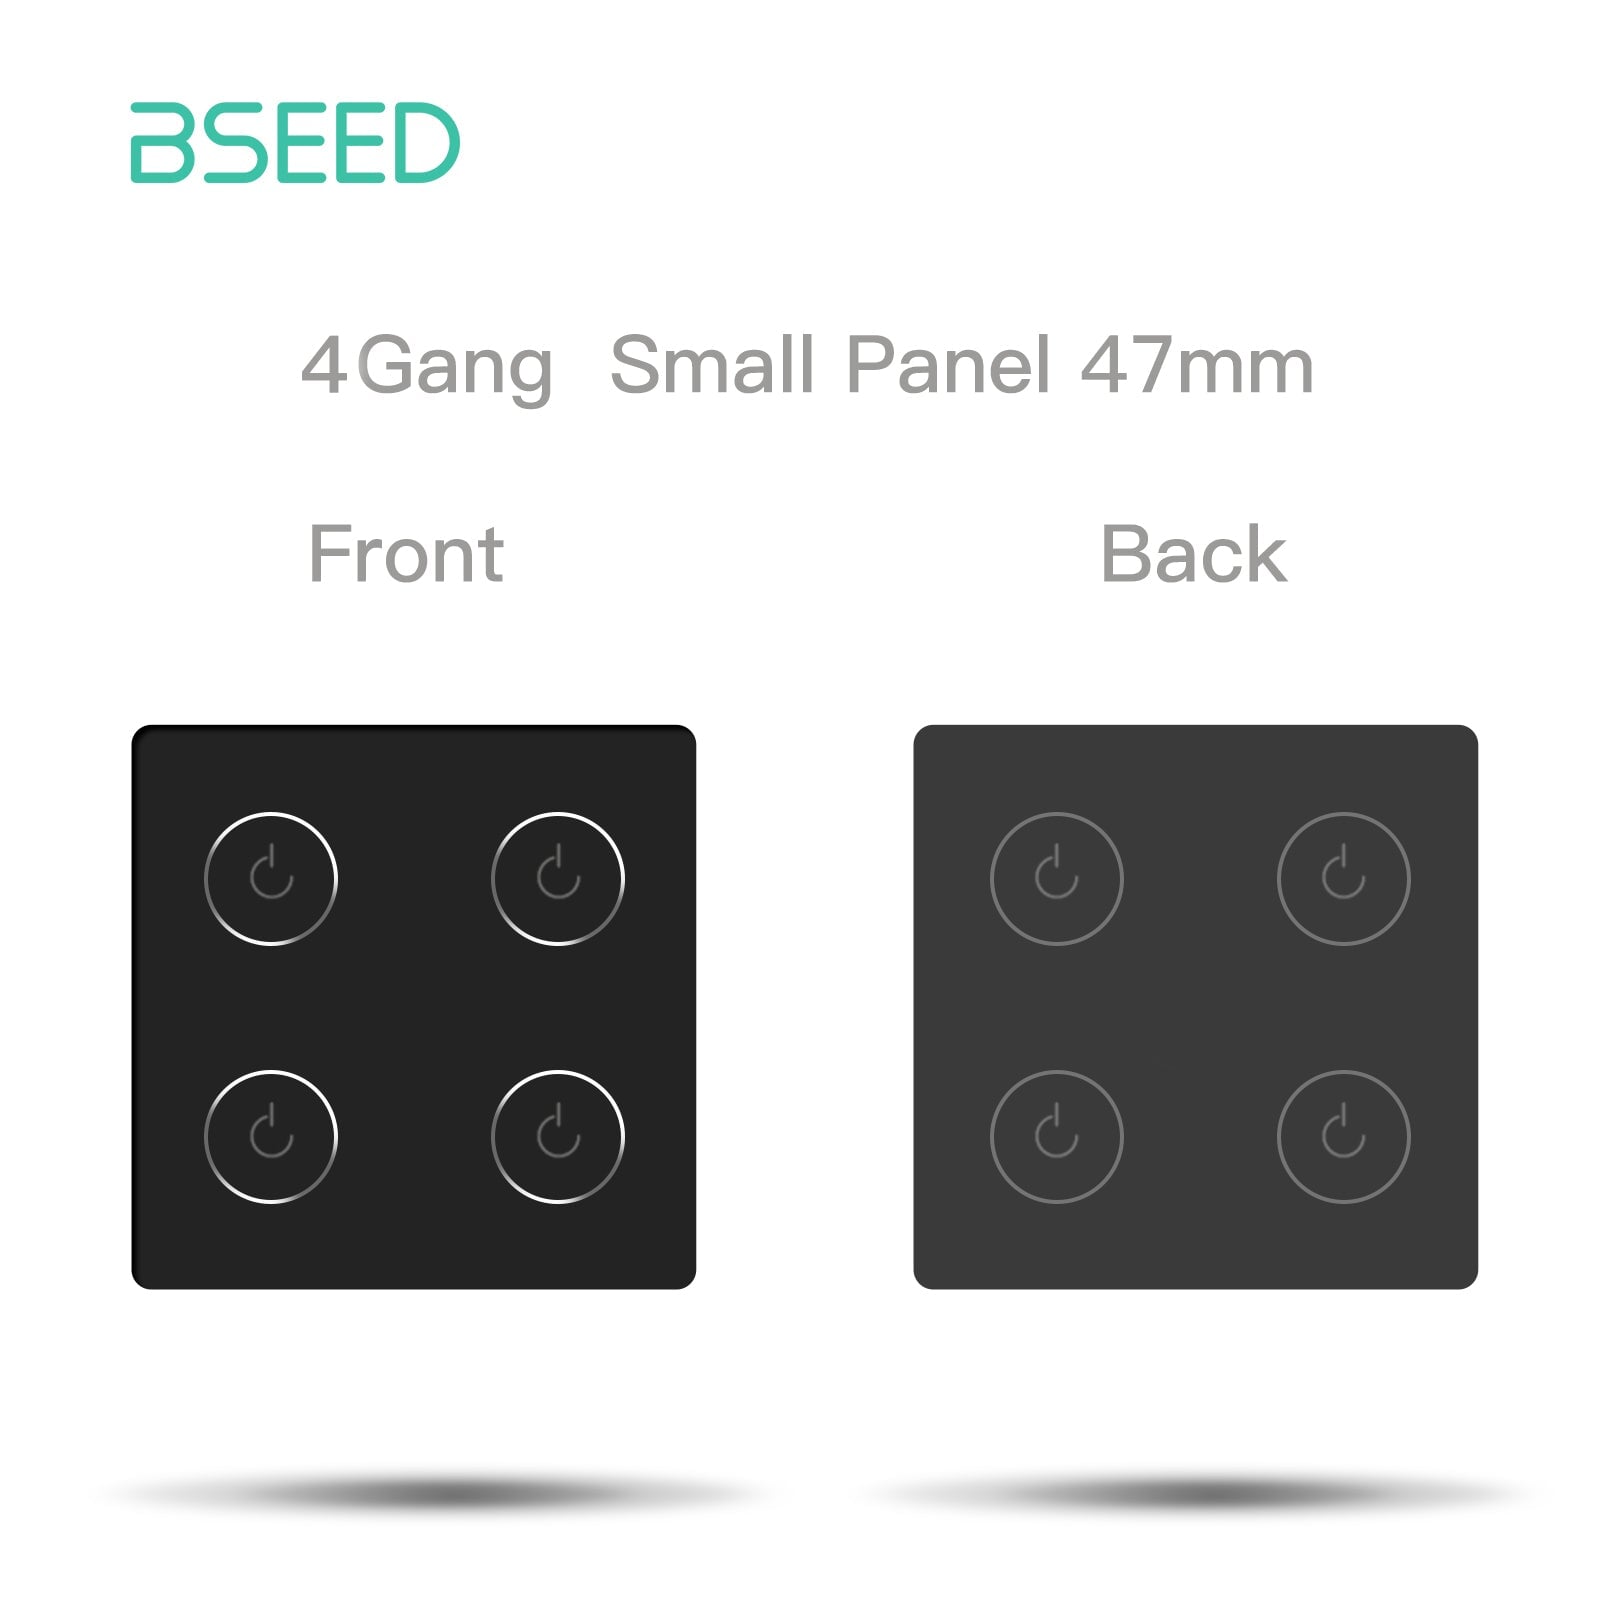 Bseed 47mm Glass Panel Switch DIY Part With Or Without Icon Bseedswitch Black Wifi 4Gang Switch icon Panel 